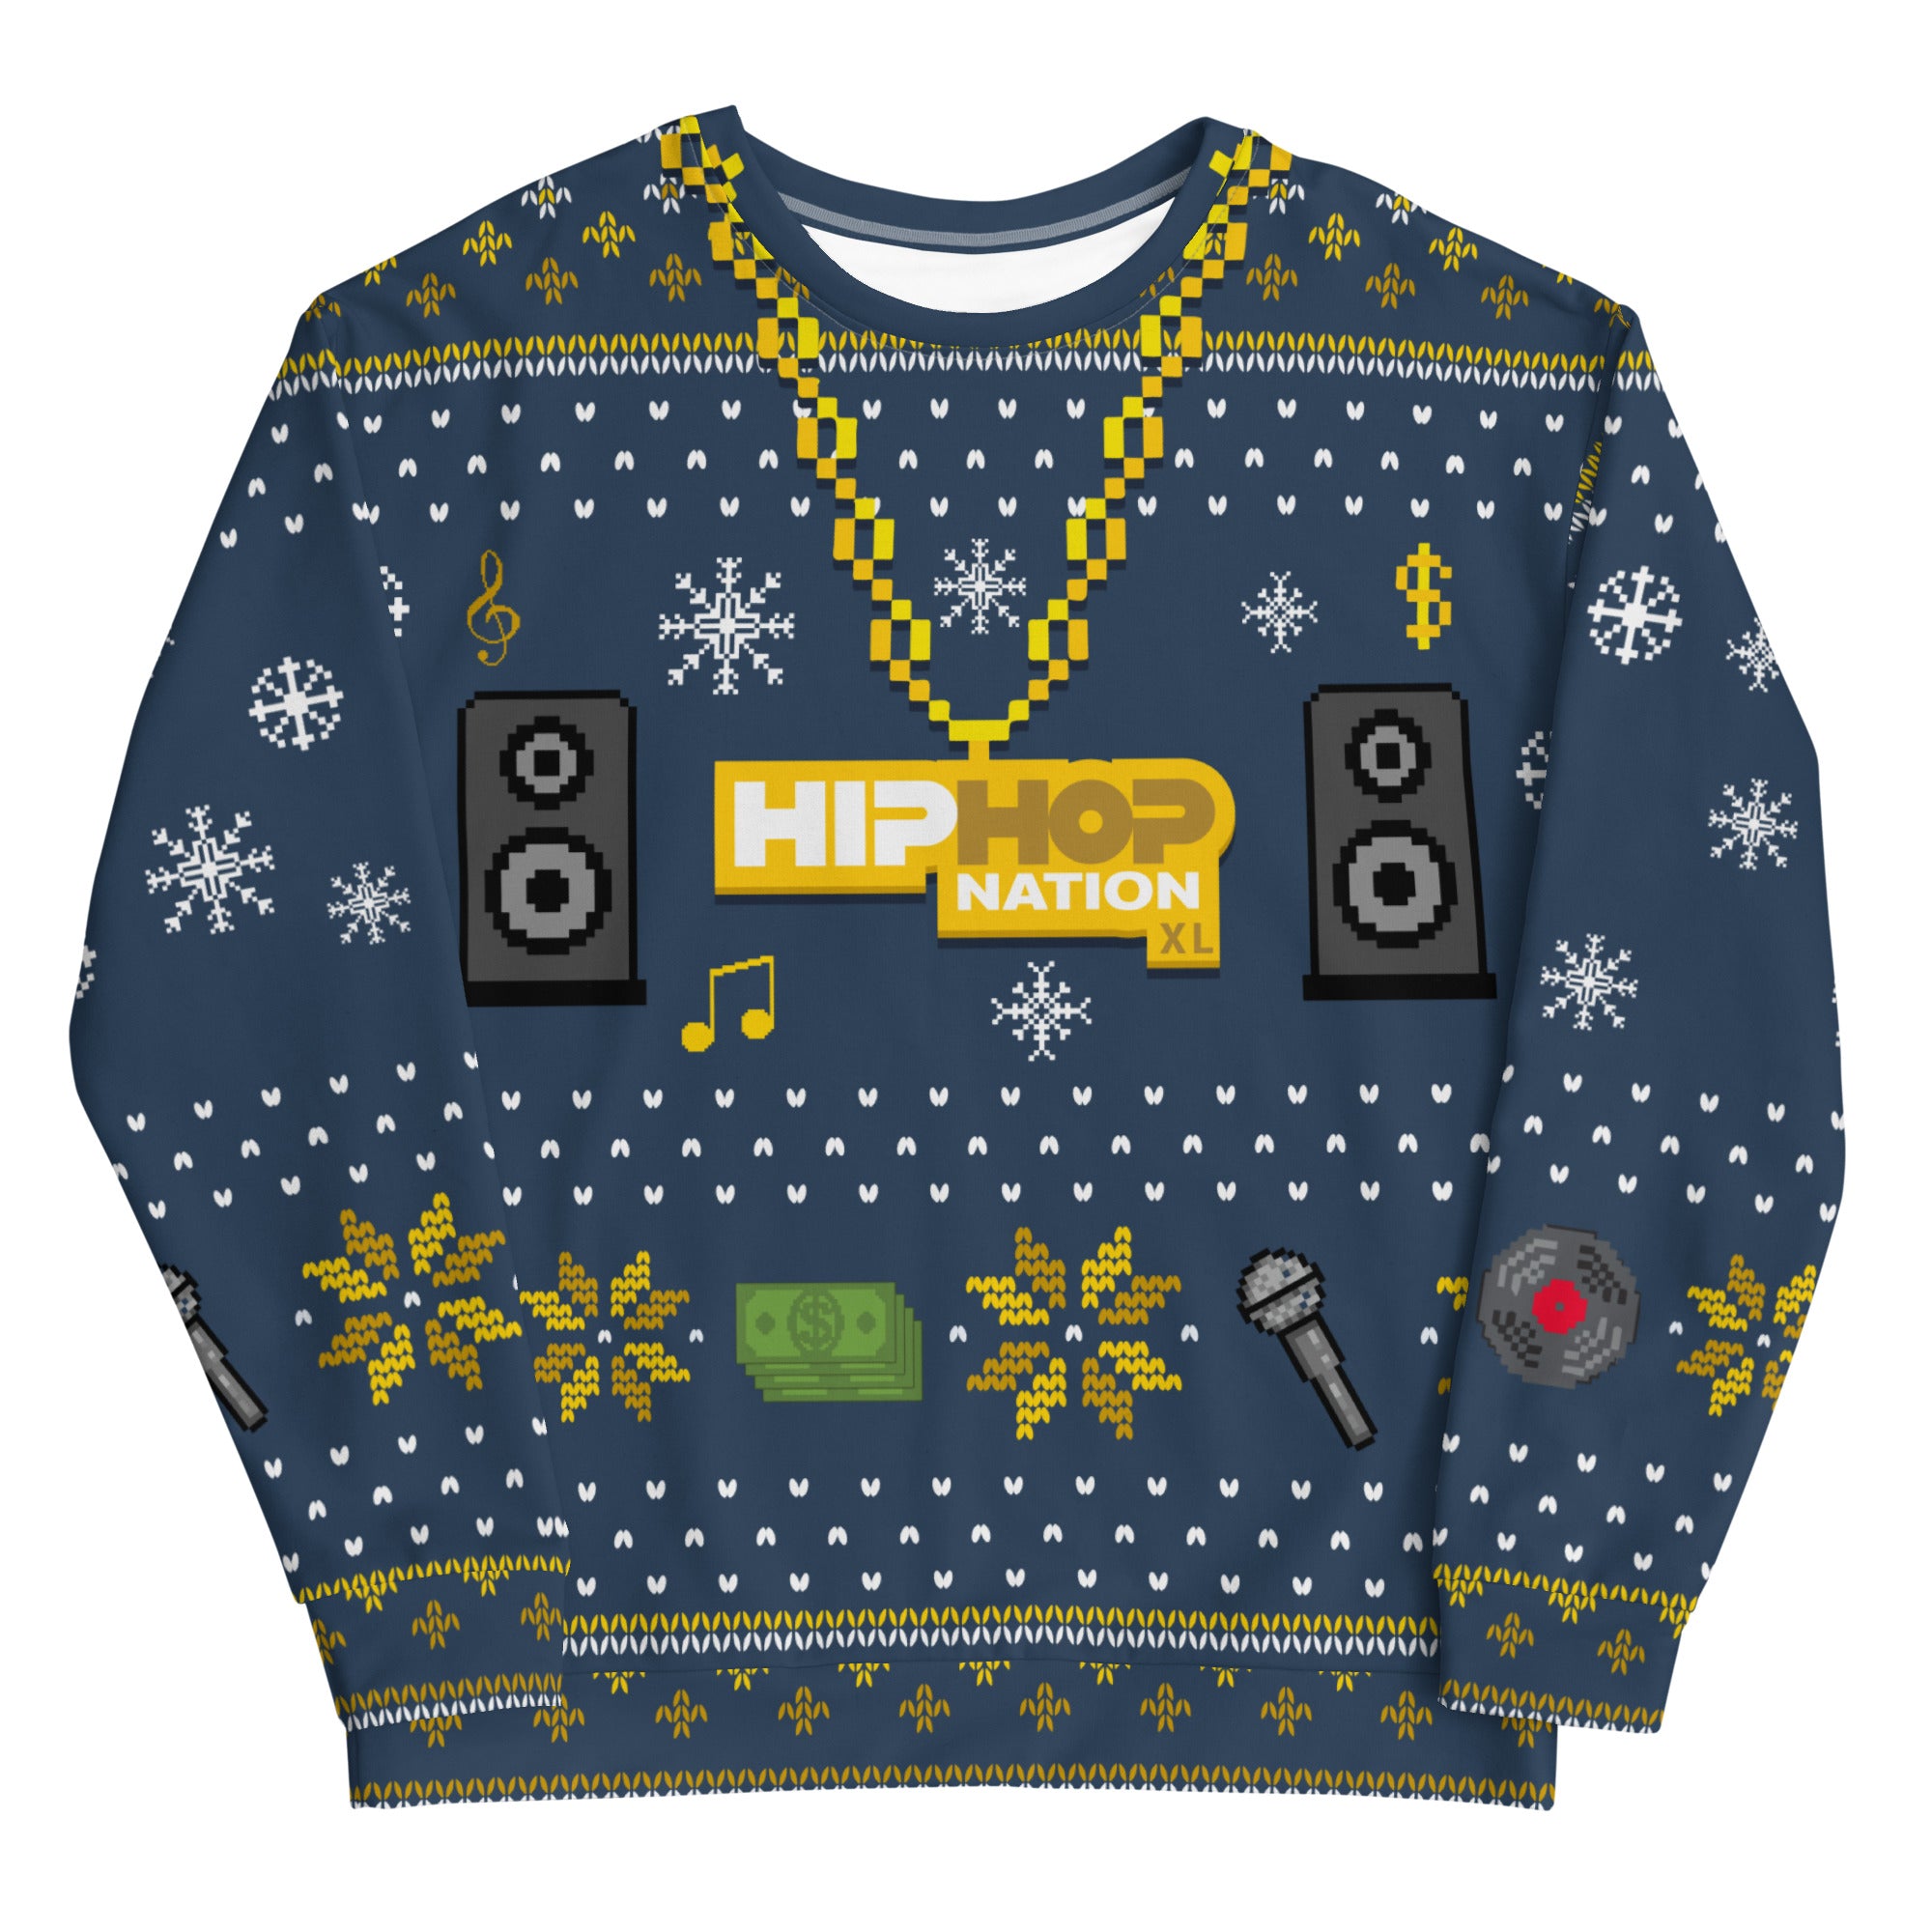 Hip-Hop Nation: Iced Out "Ugly Sweater" Sweatshirt